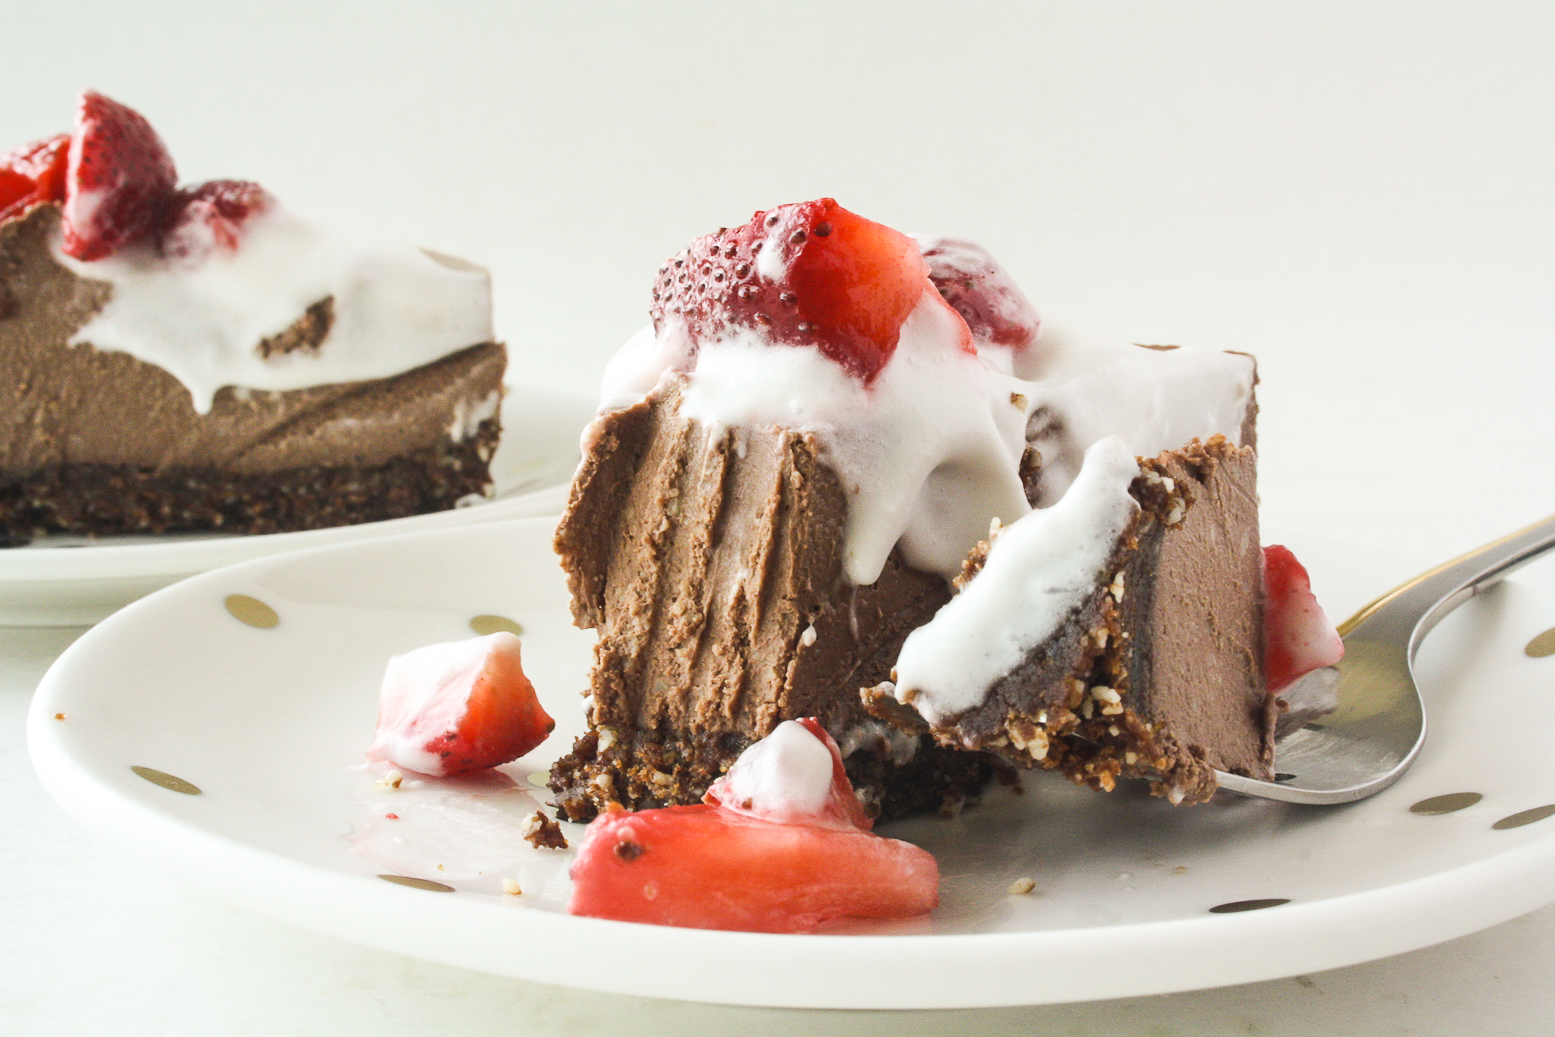 Creamy, naturally-sweetened chocolate cheesecake made with cashews, dates and almonds!